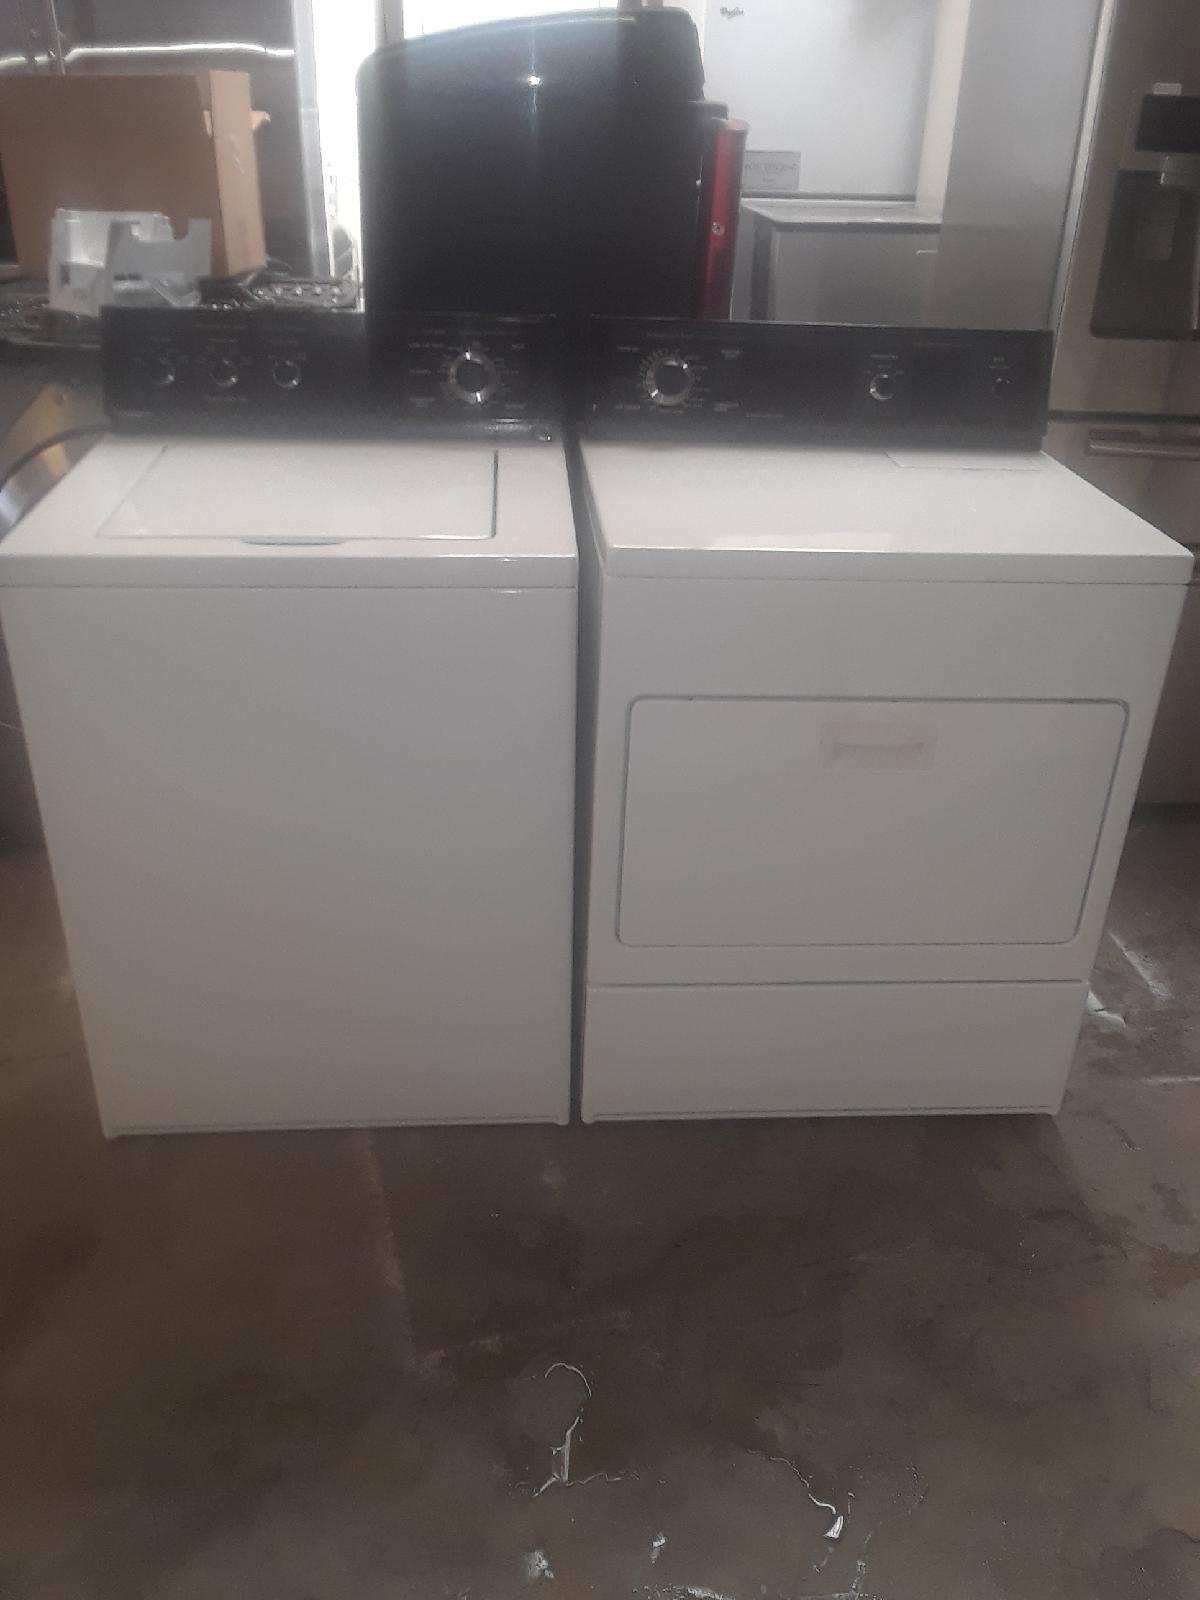 set washer and dryer brand kitchenAid electric dryer everything is good working condition 90 days warranty including delivery e istalasion